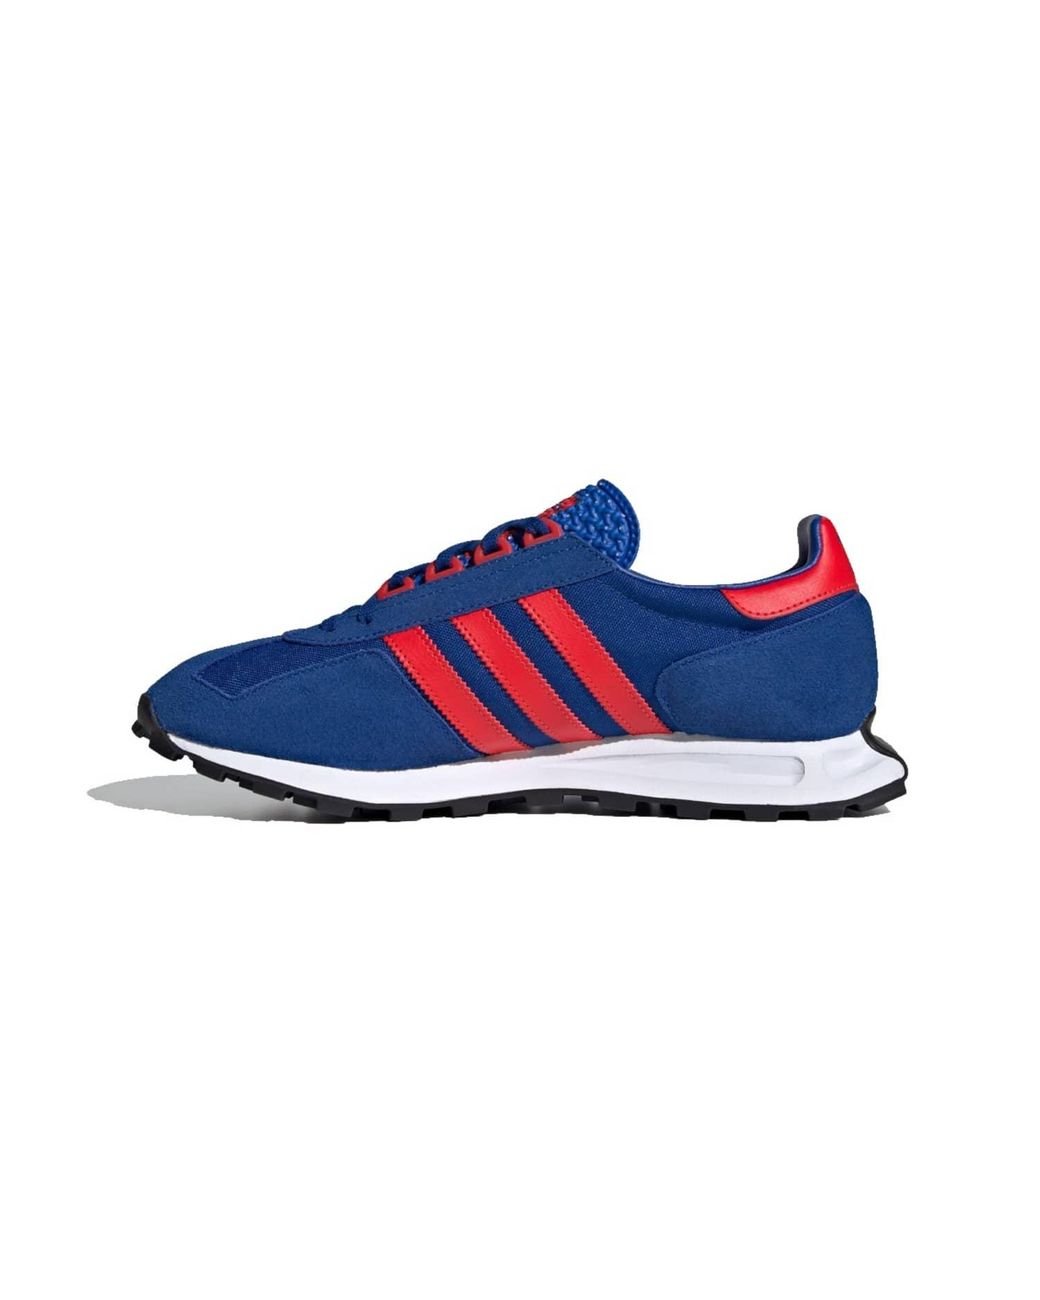 adidas Racing Shoes Royal & Red for Lyst